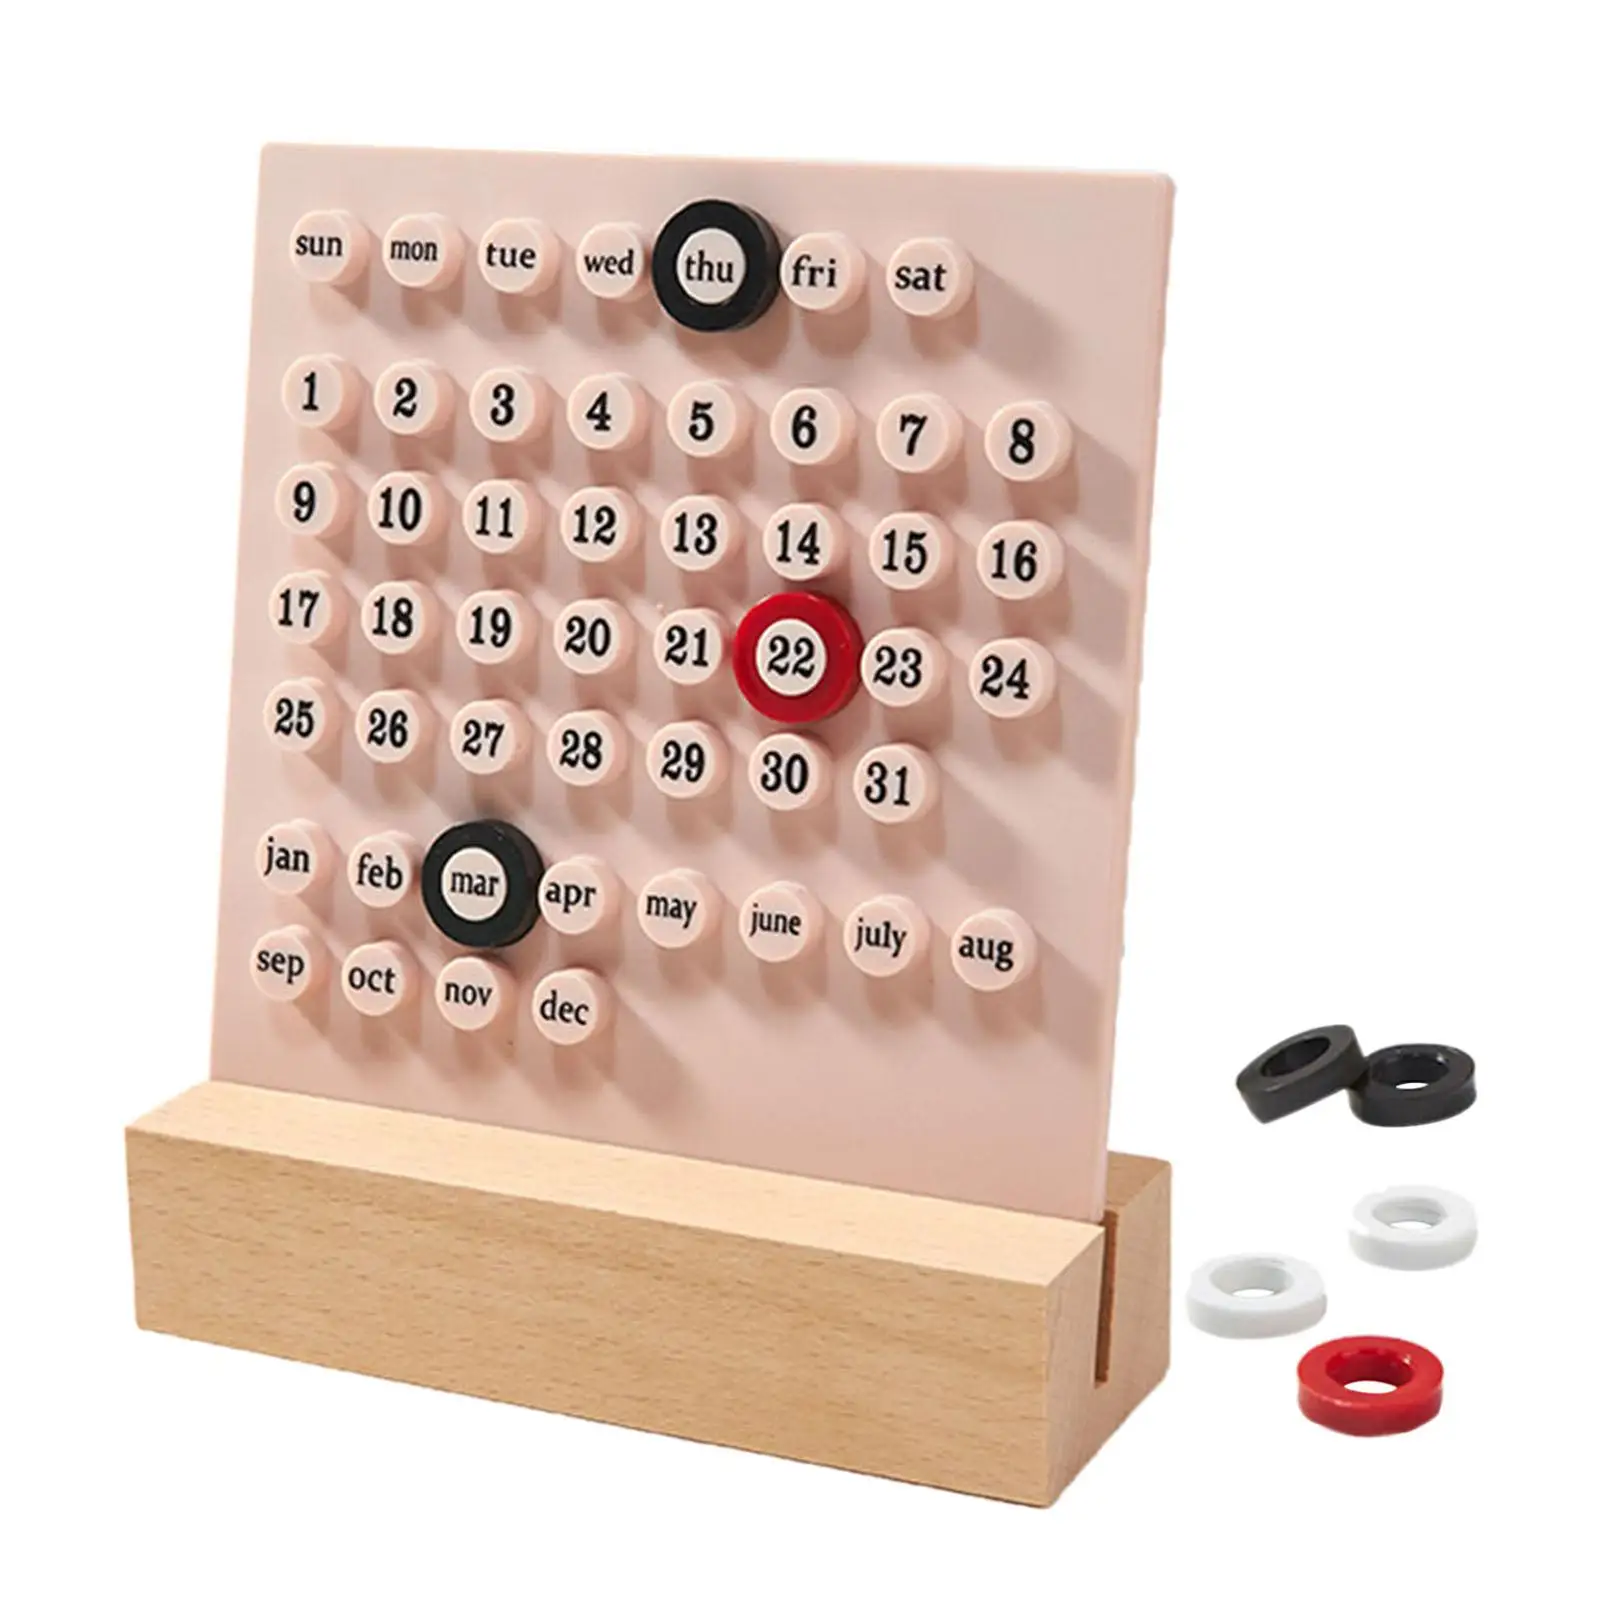 Wooden Learning Calendar Toys Educational Toy Month Date DIY Accessories Perpetual Calendar for Indoor Home Office Desktop